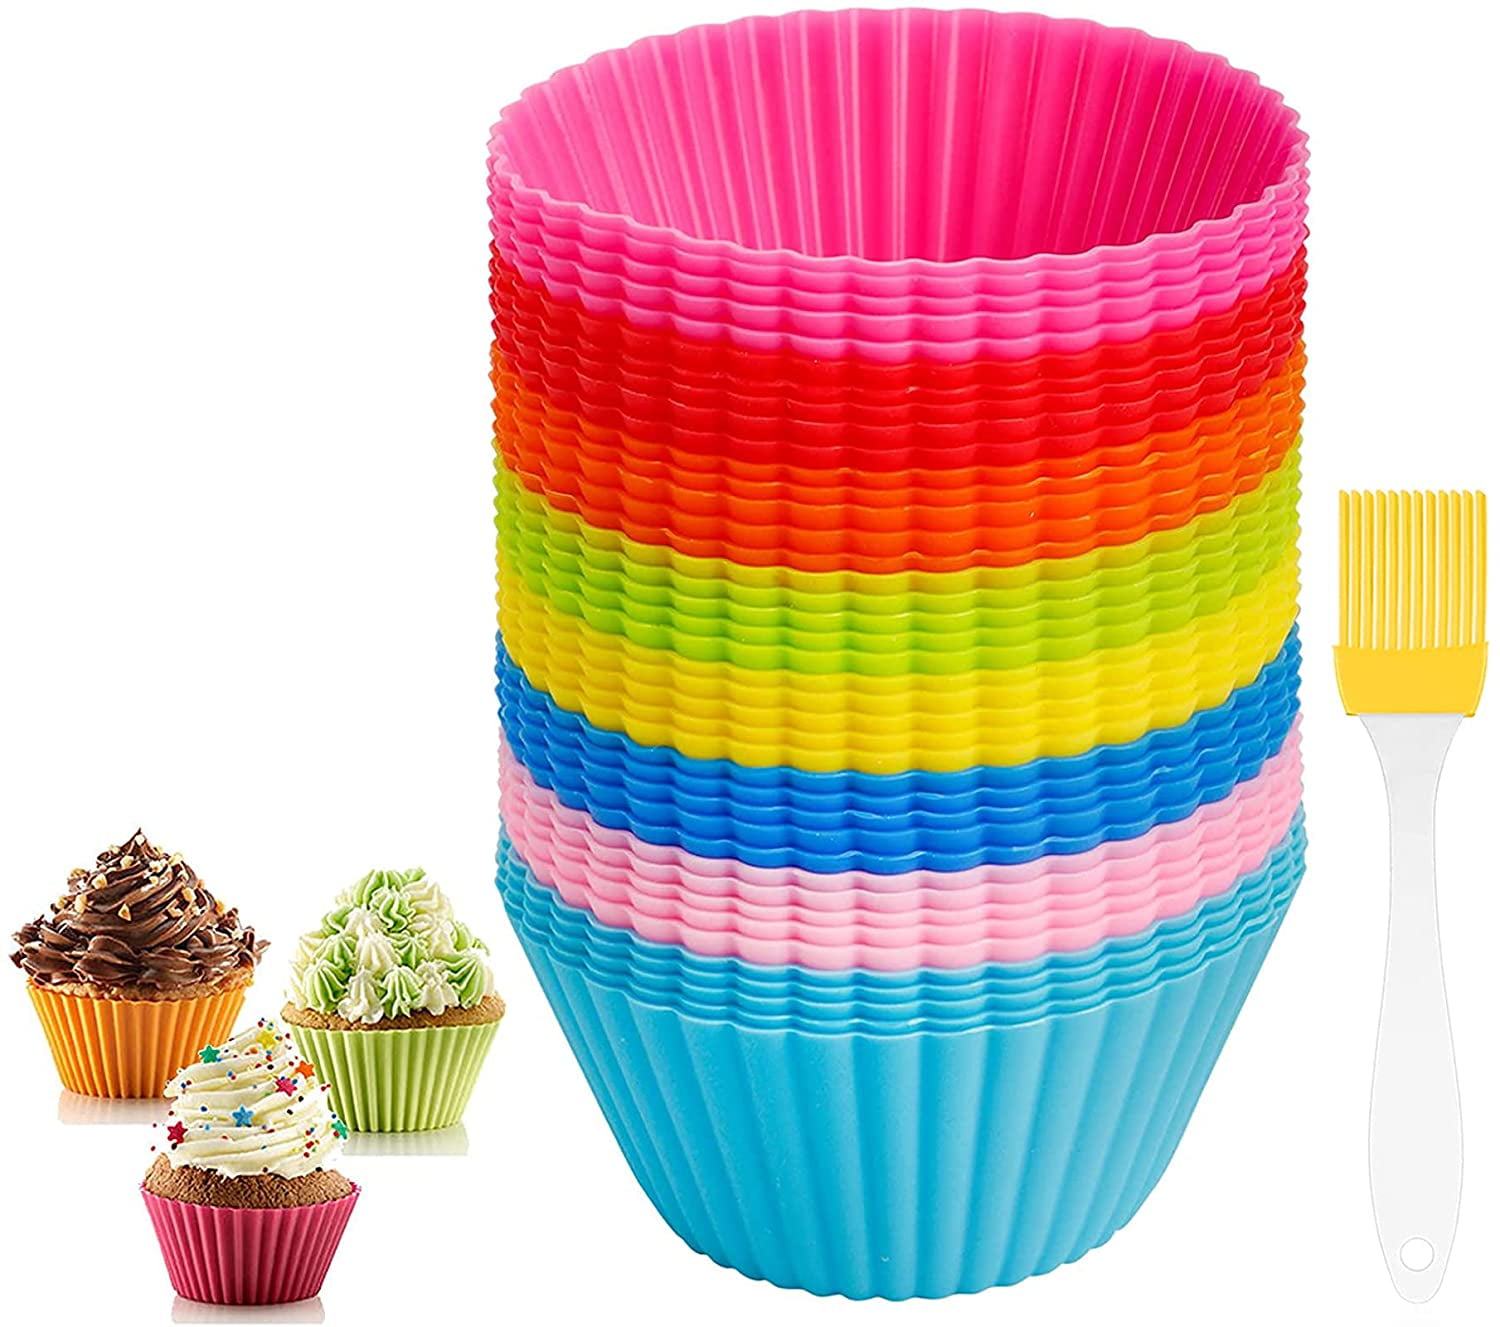 6 Vibrant Colors Round Reusable & Nonstick Muffin Molds,36 Pack Rainbow Thicken Silicone Cupcake Muffin Baking Cups Liners Molds Sets 